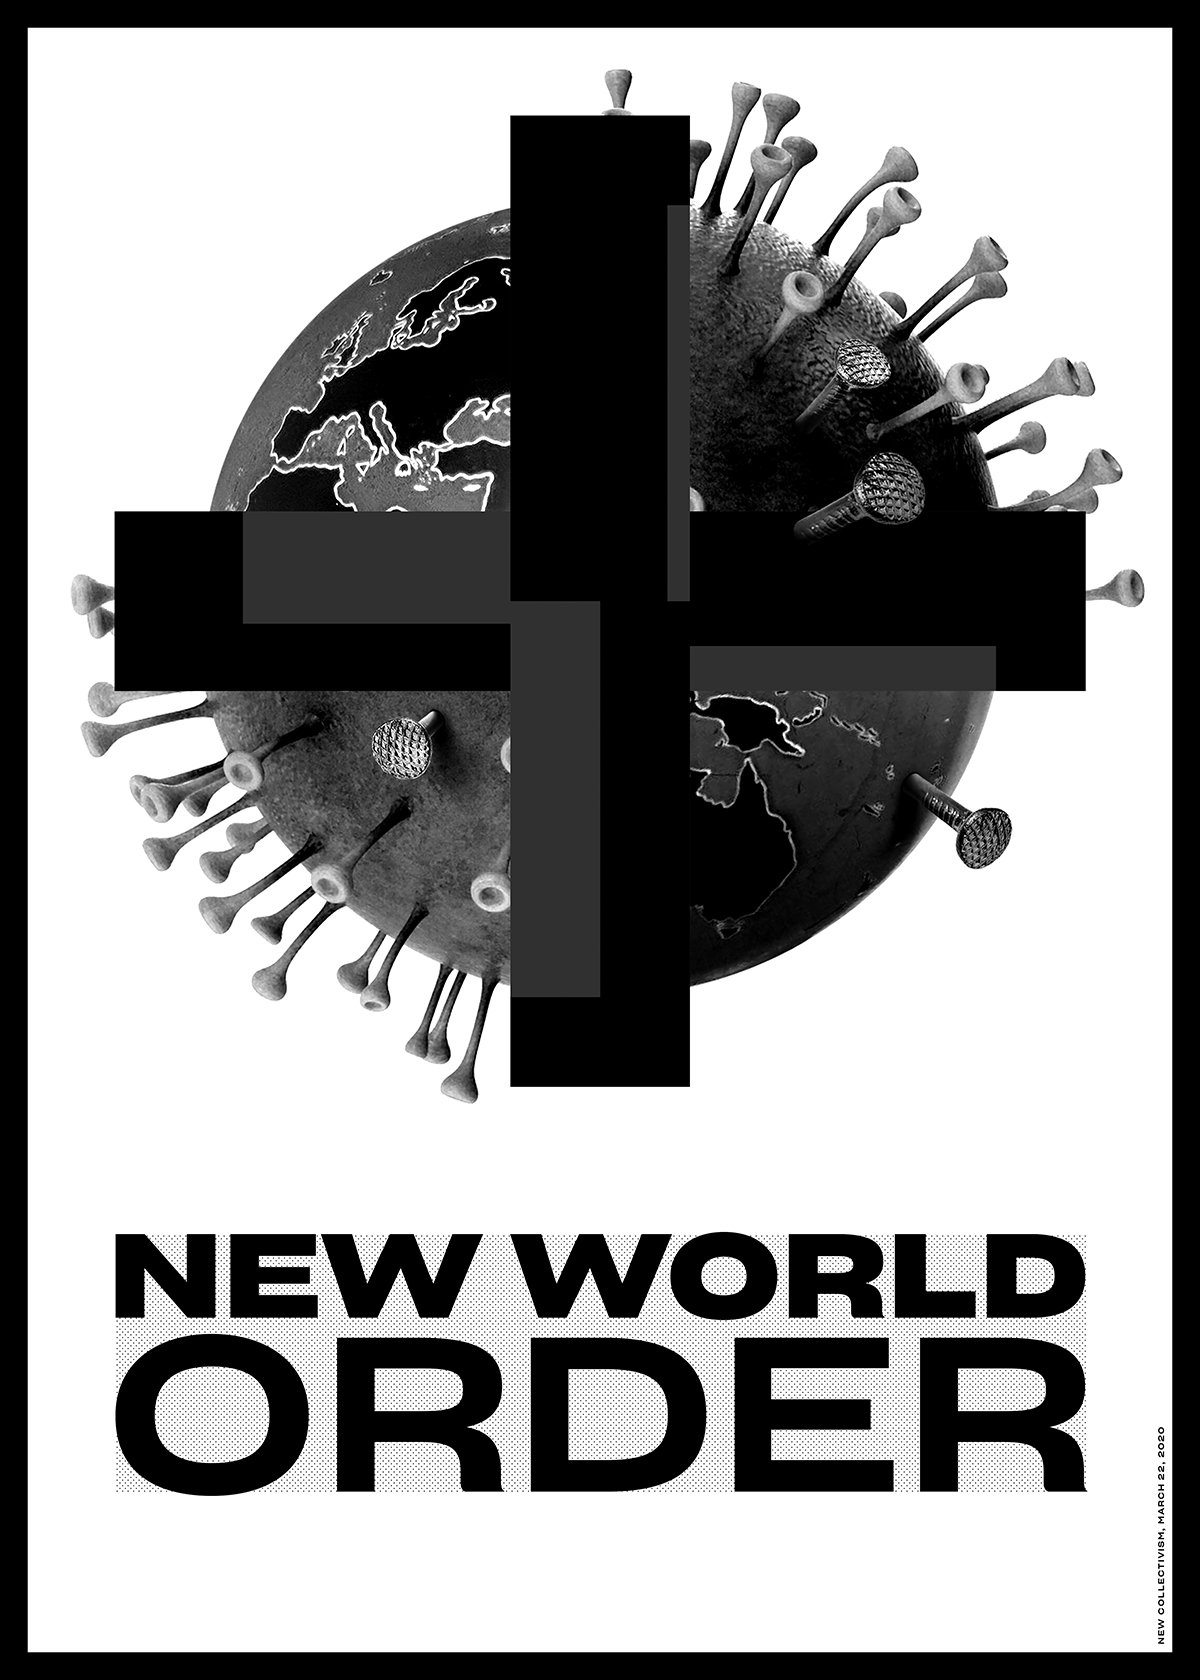 New World Order poster by New Collectivism.